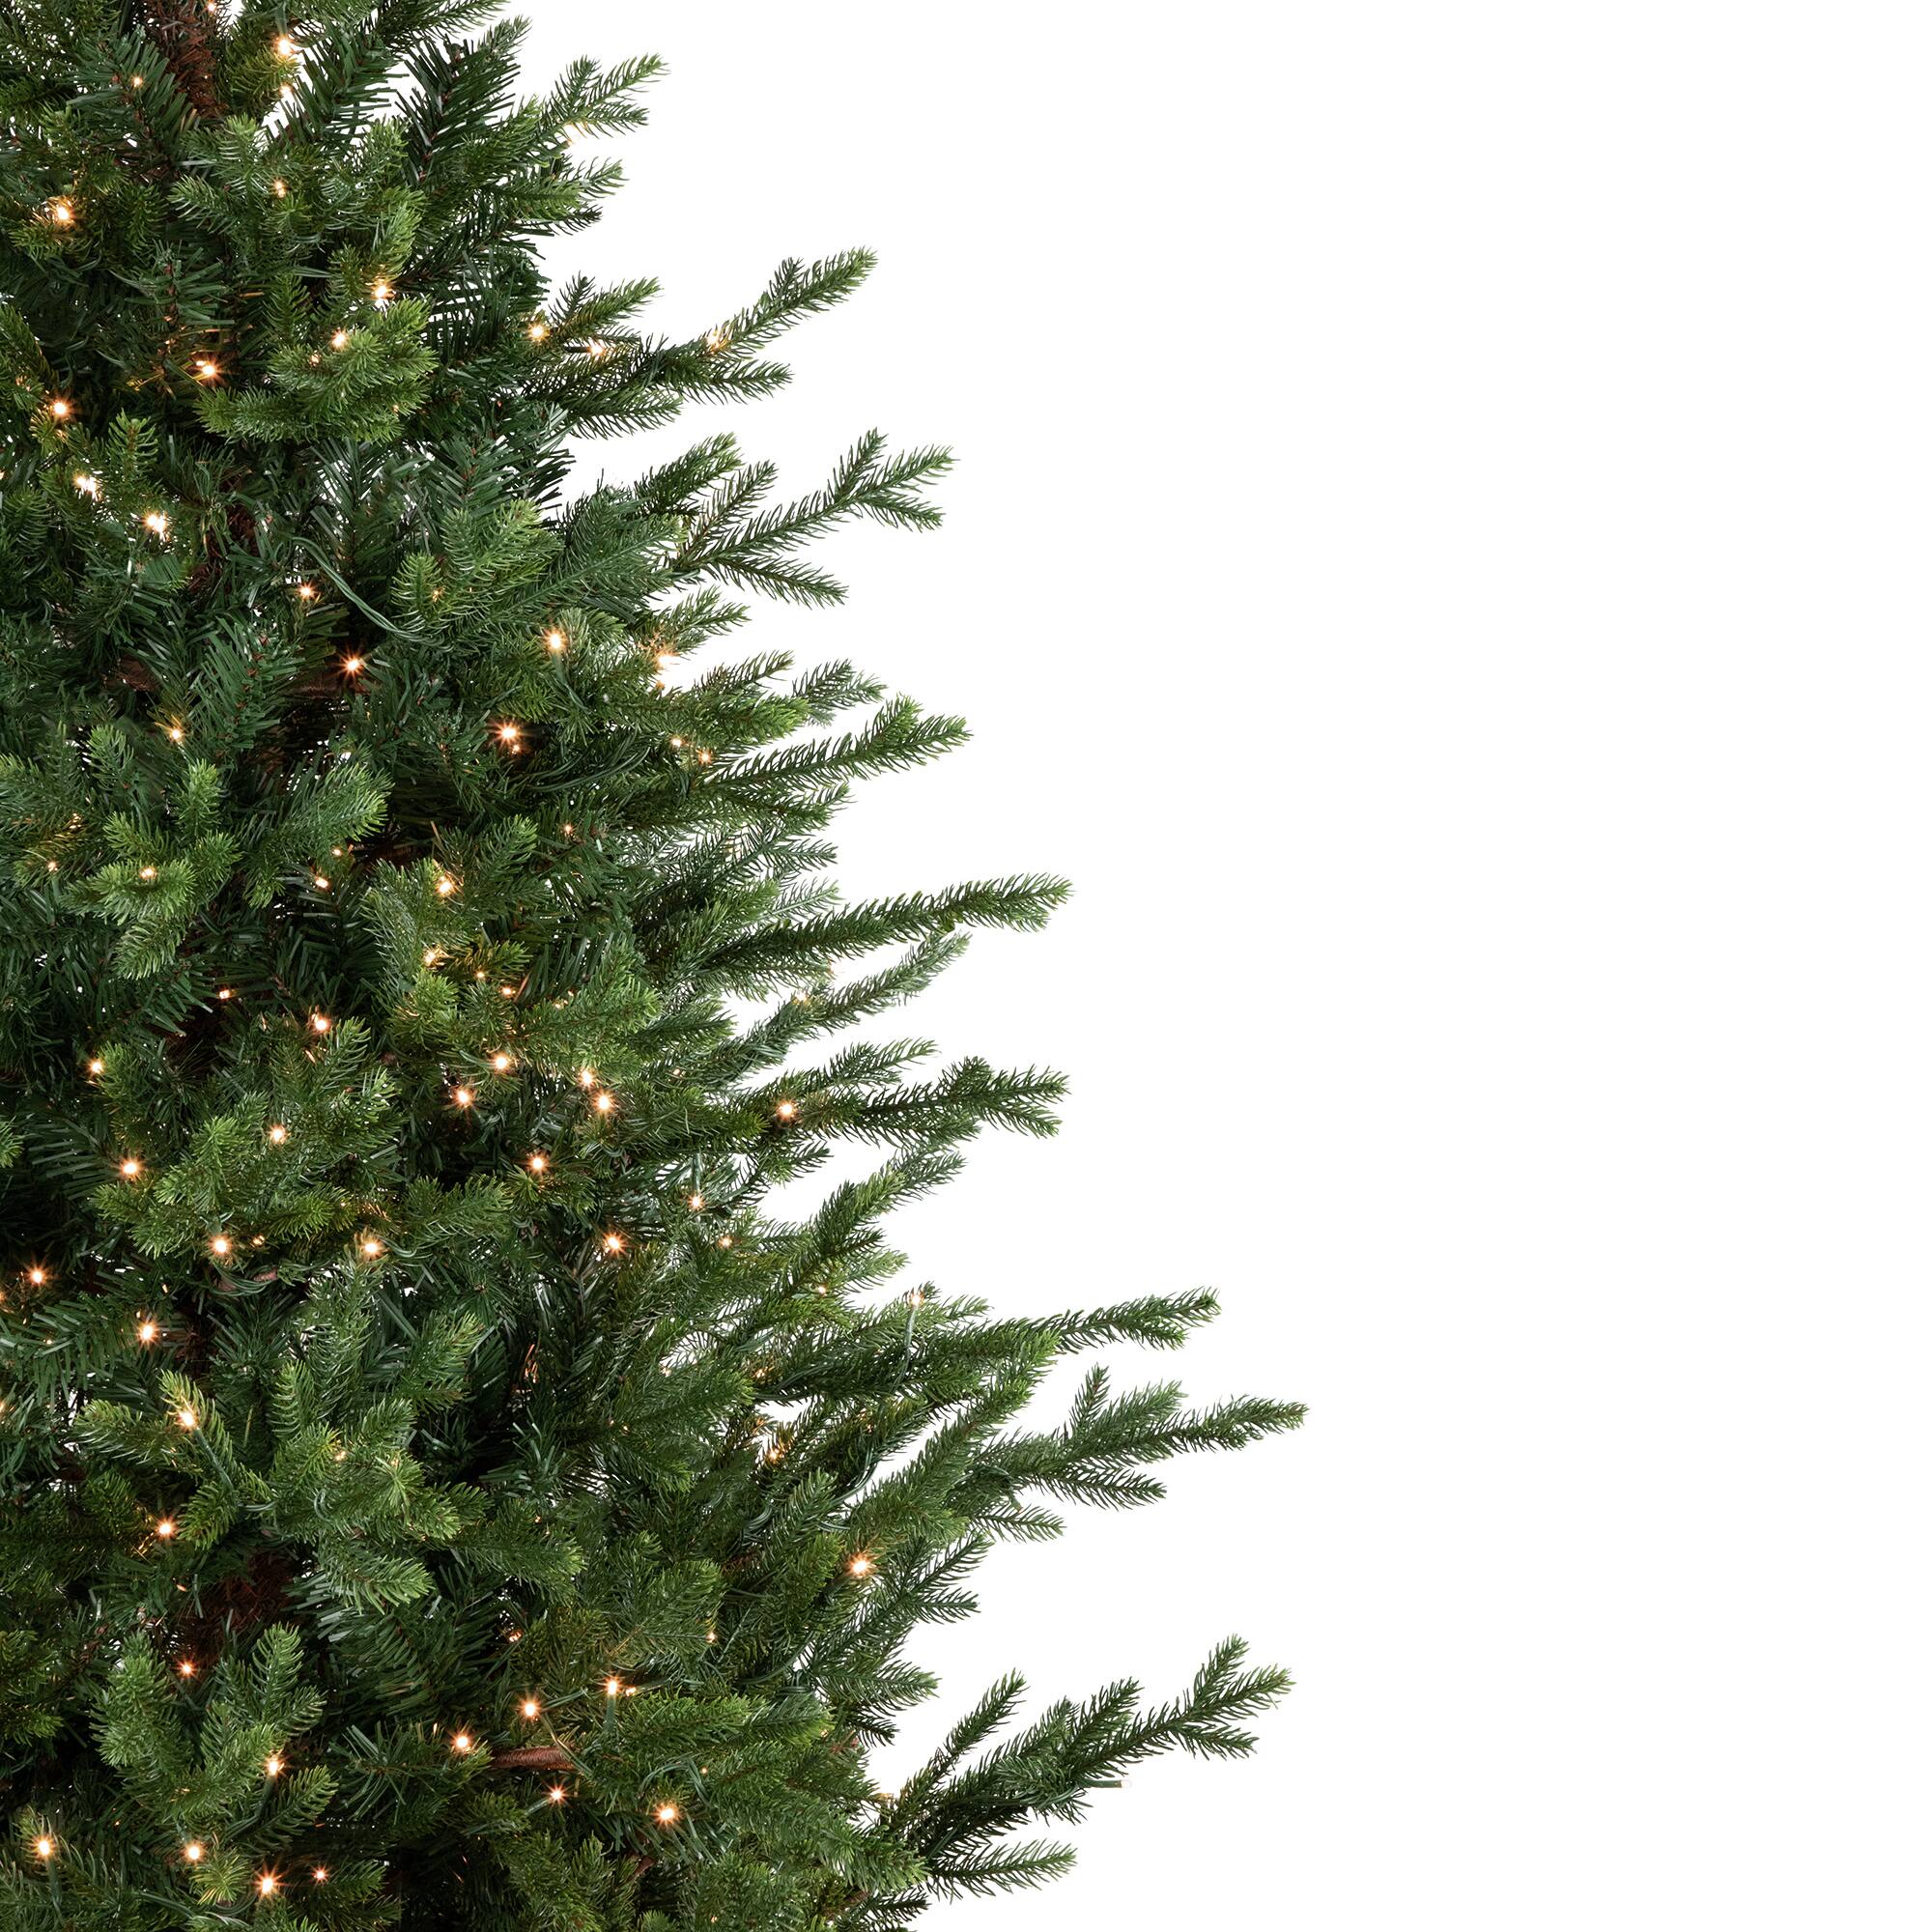 6ft. Pre-Lit Deluxe Russian Pine Artificial Christmas Tree in Planter, Warm White LED Lights